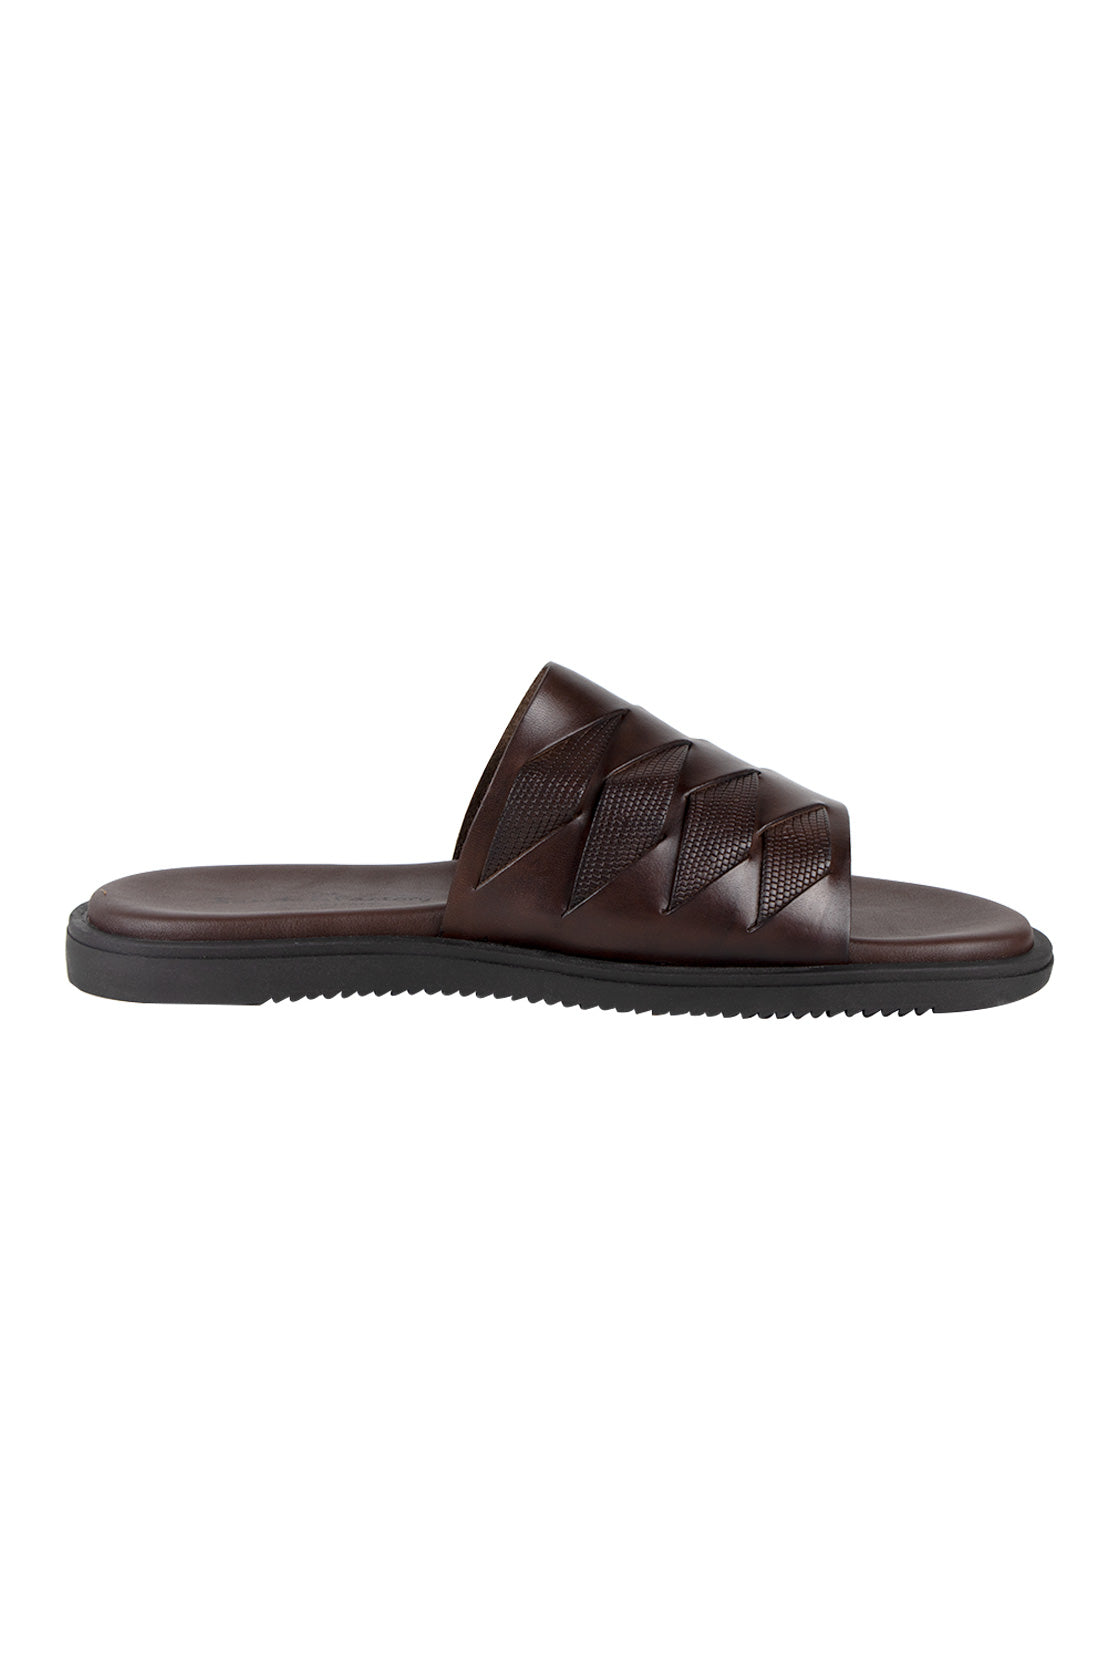 The Sandal Factory Leather Sandals Brown